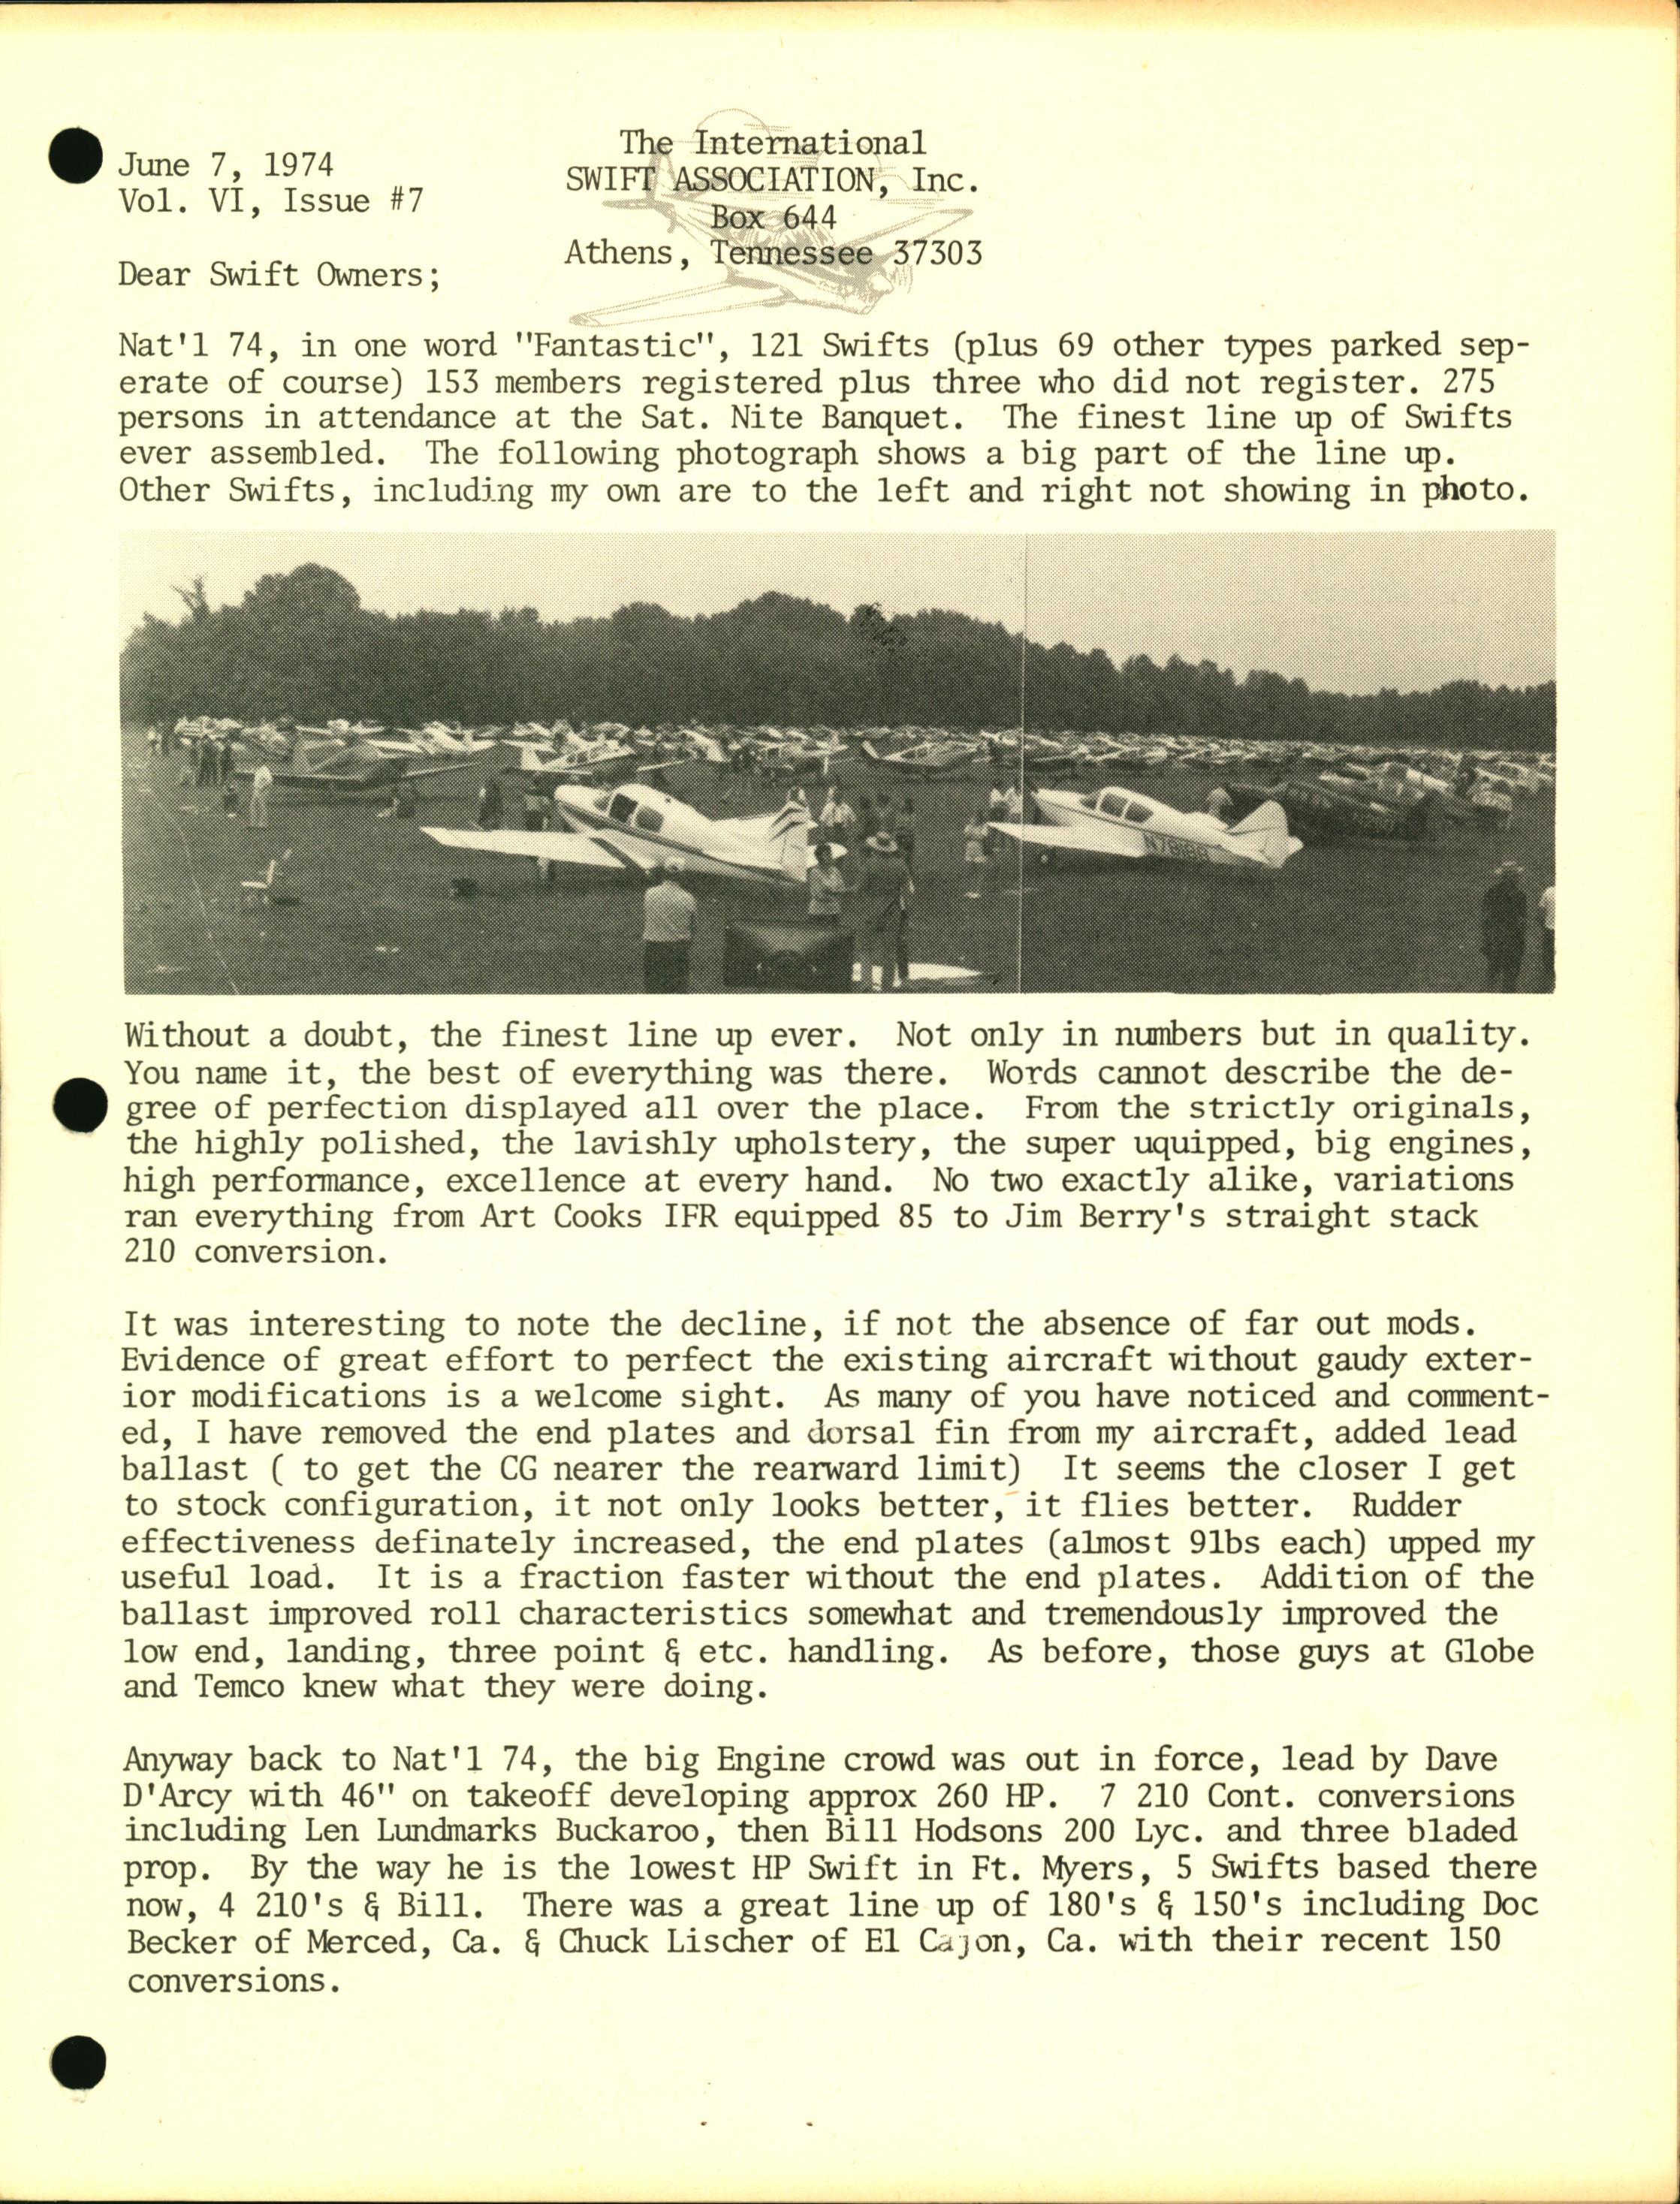 Sample page 1 from AirCorps Library document: June 1974